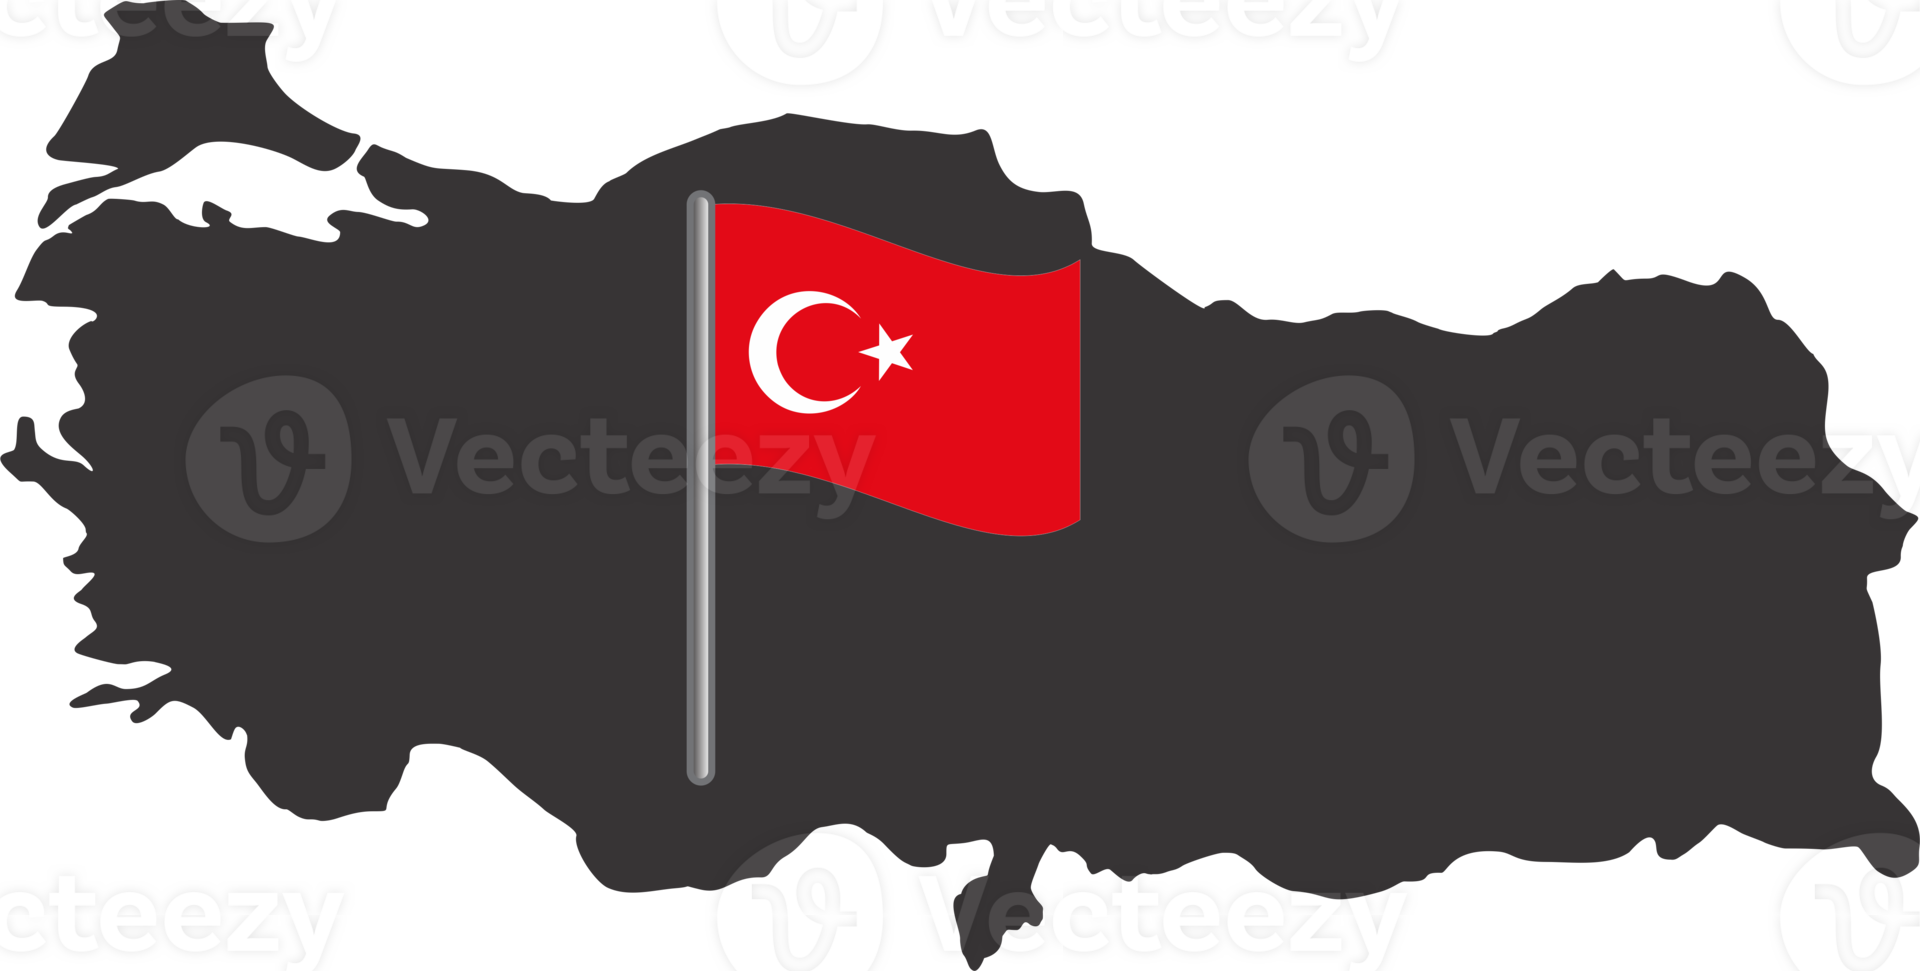 Turkey flag pin map location png